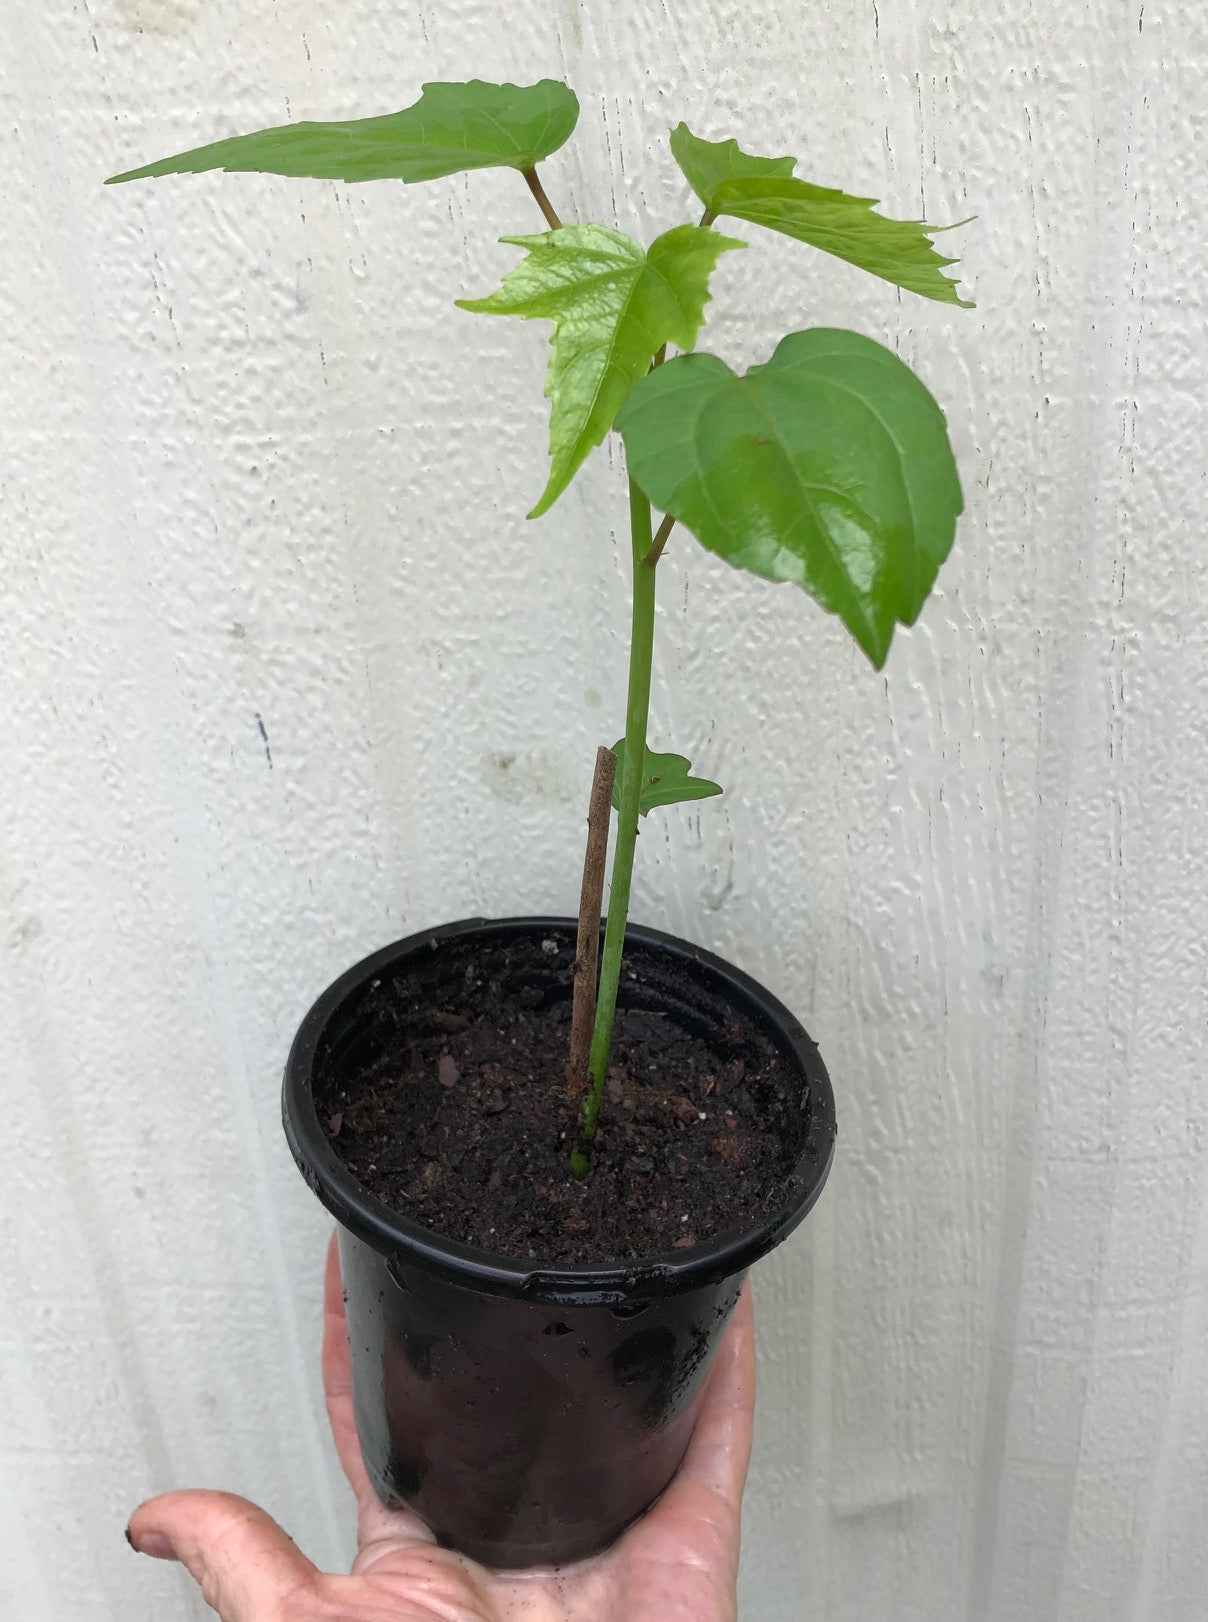 Live Hibiscus coccineus, Red Texas Star Hibiscus plant in 4 inch pot